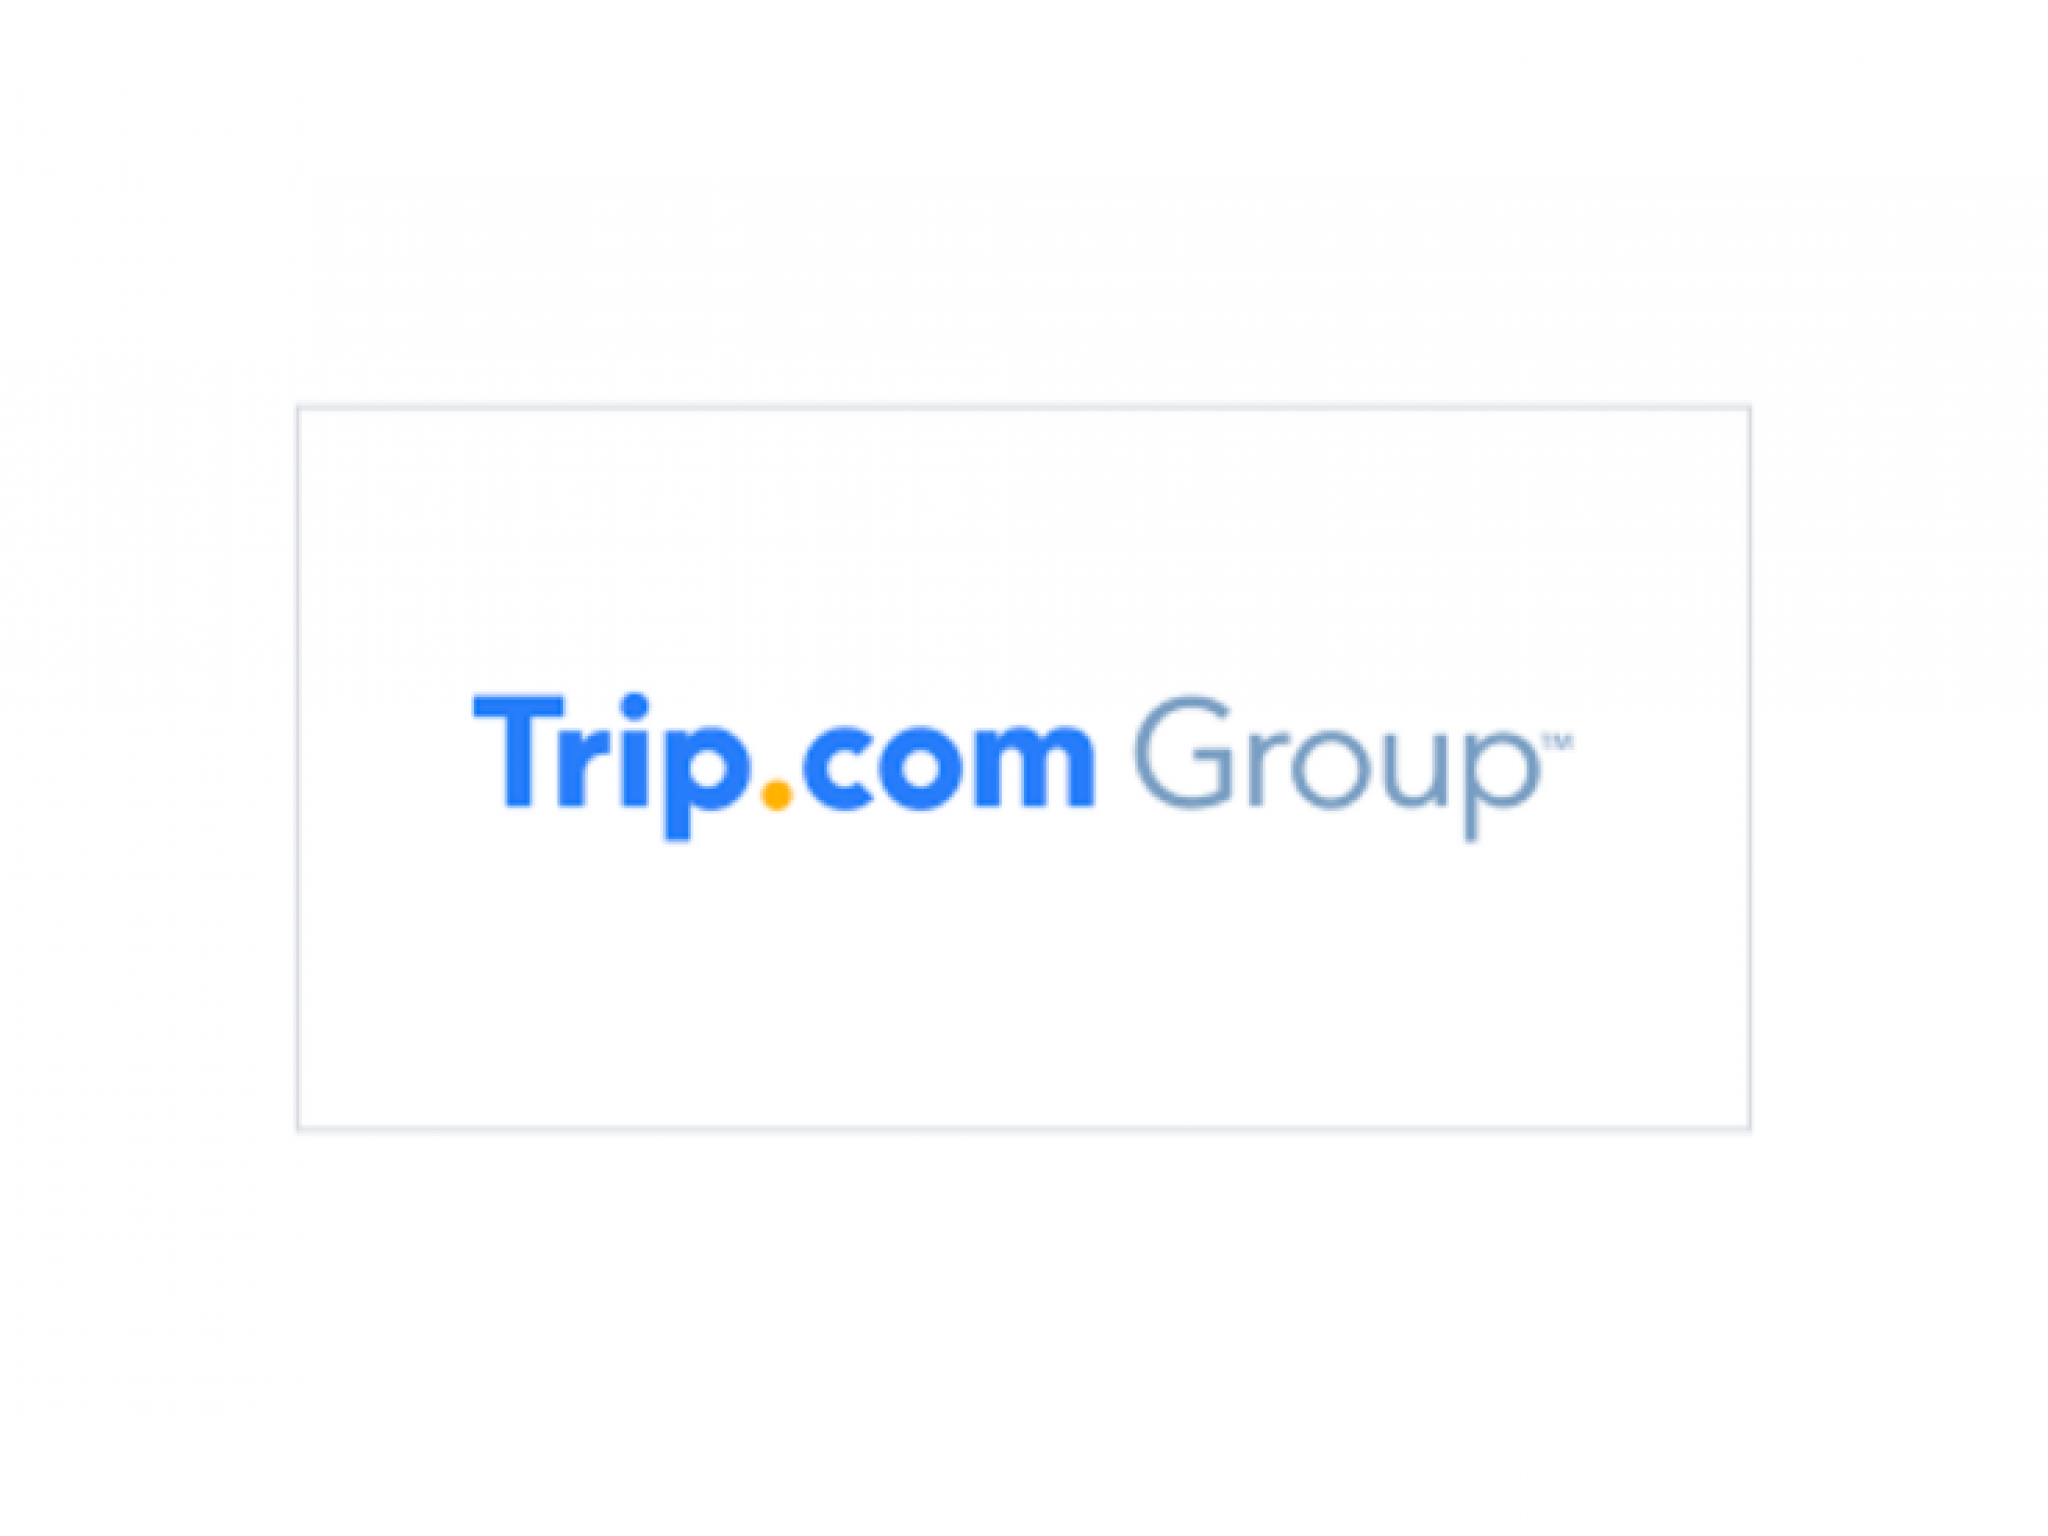  tripcom-stock-makes-it-to-analysts-top-pick-amid-expanding-chinas-outbound-travel 